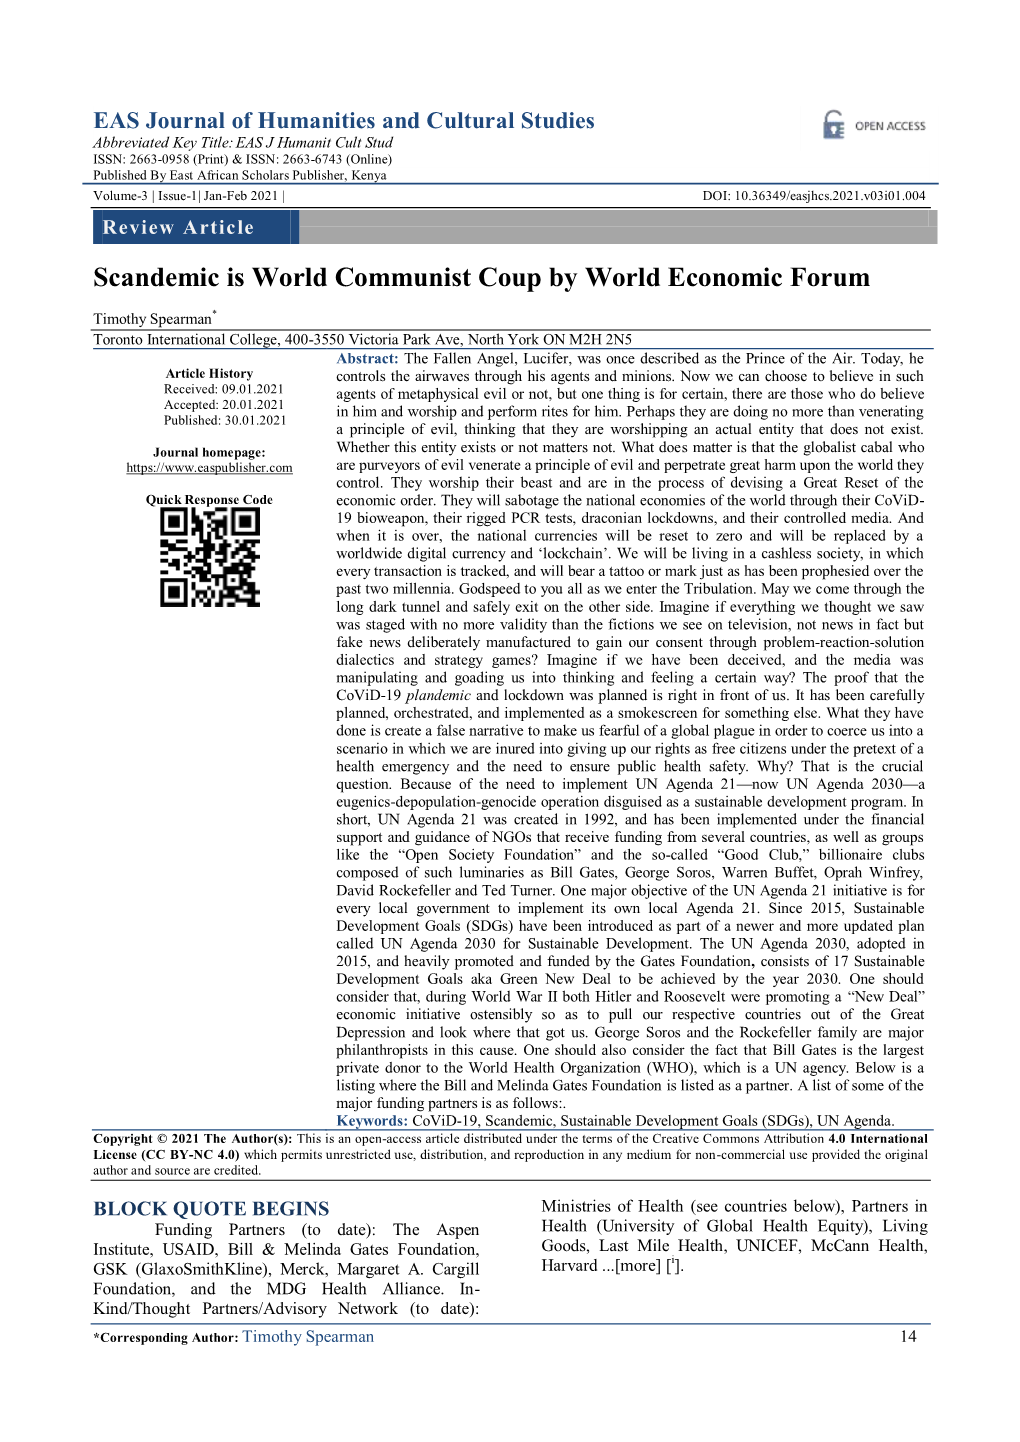 Scandemic Is World Communist Coup by World Economic Forum